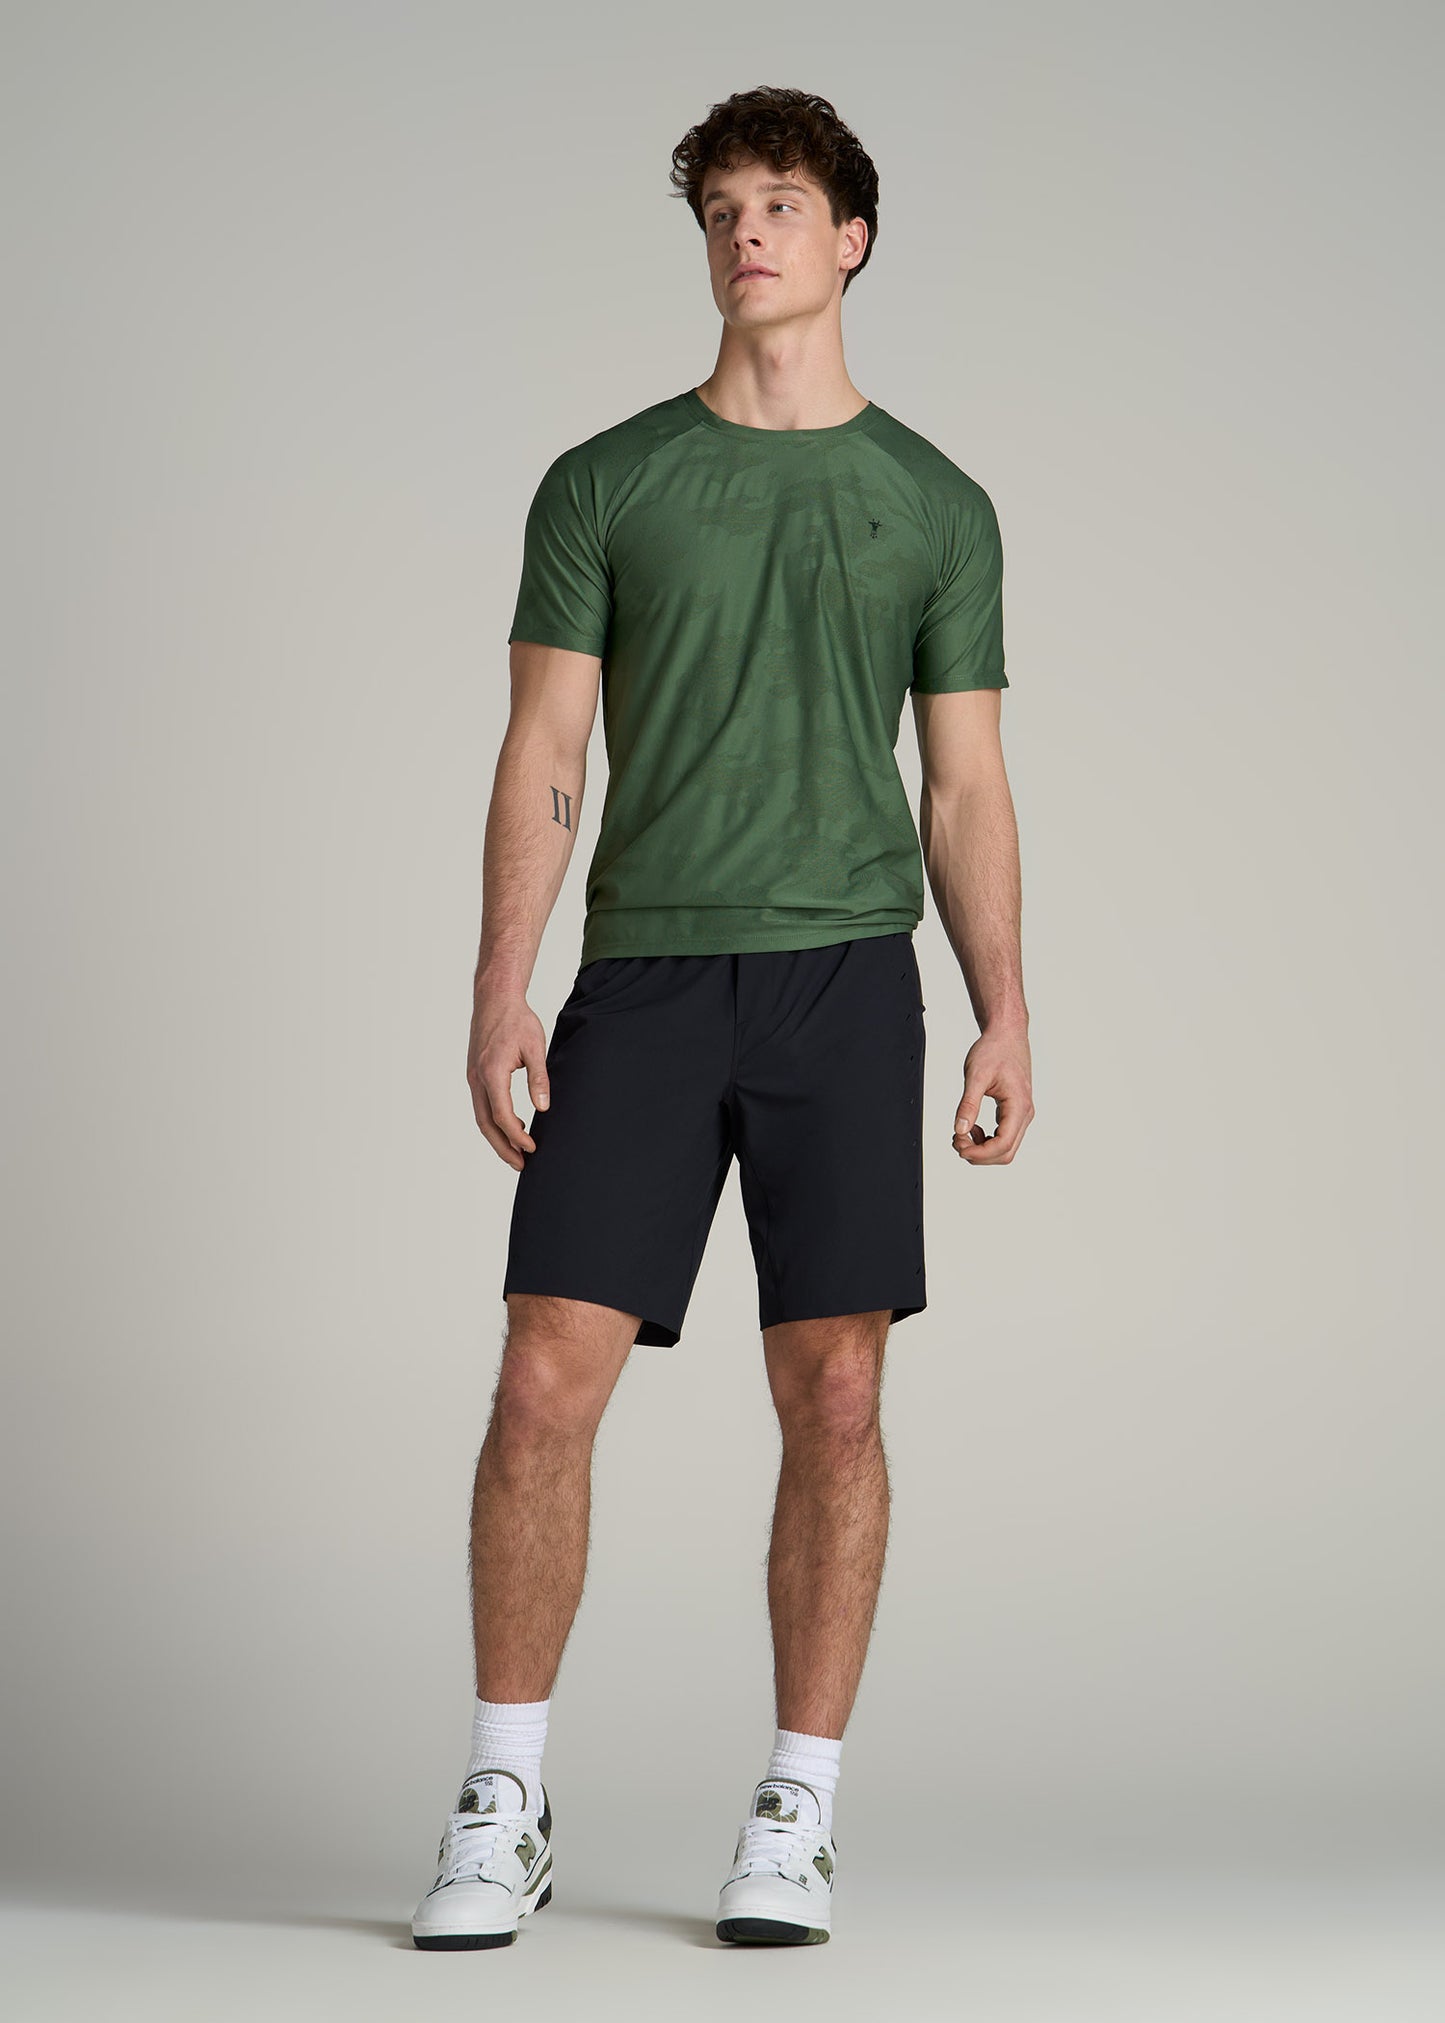 Featherweight Perforated Training Shorts for Tall Men in Black